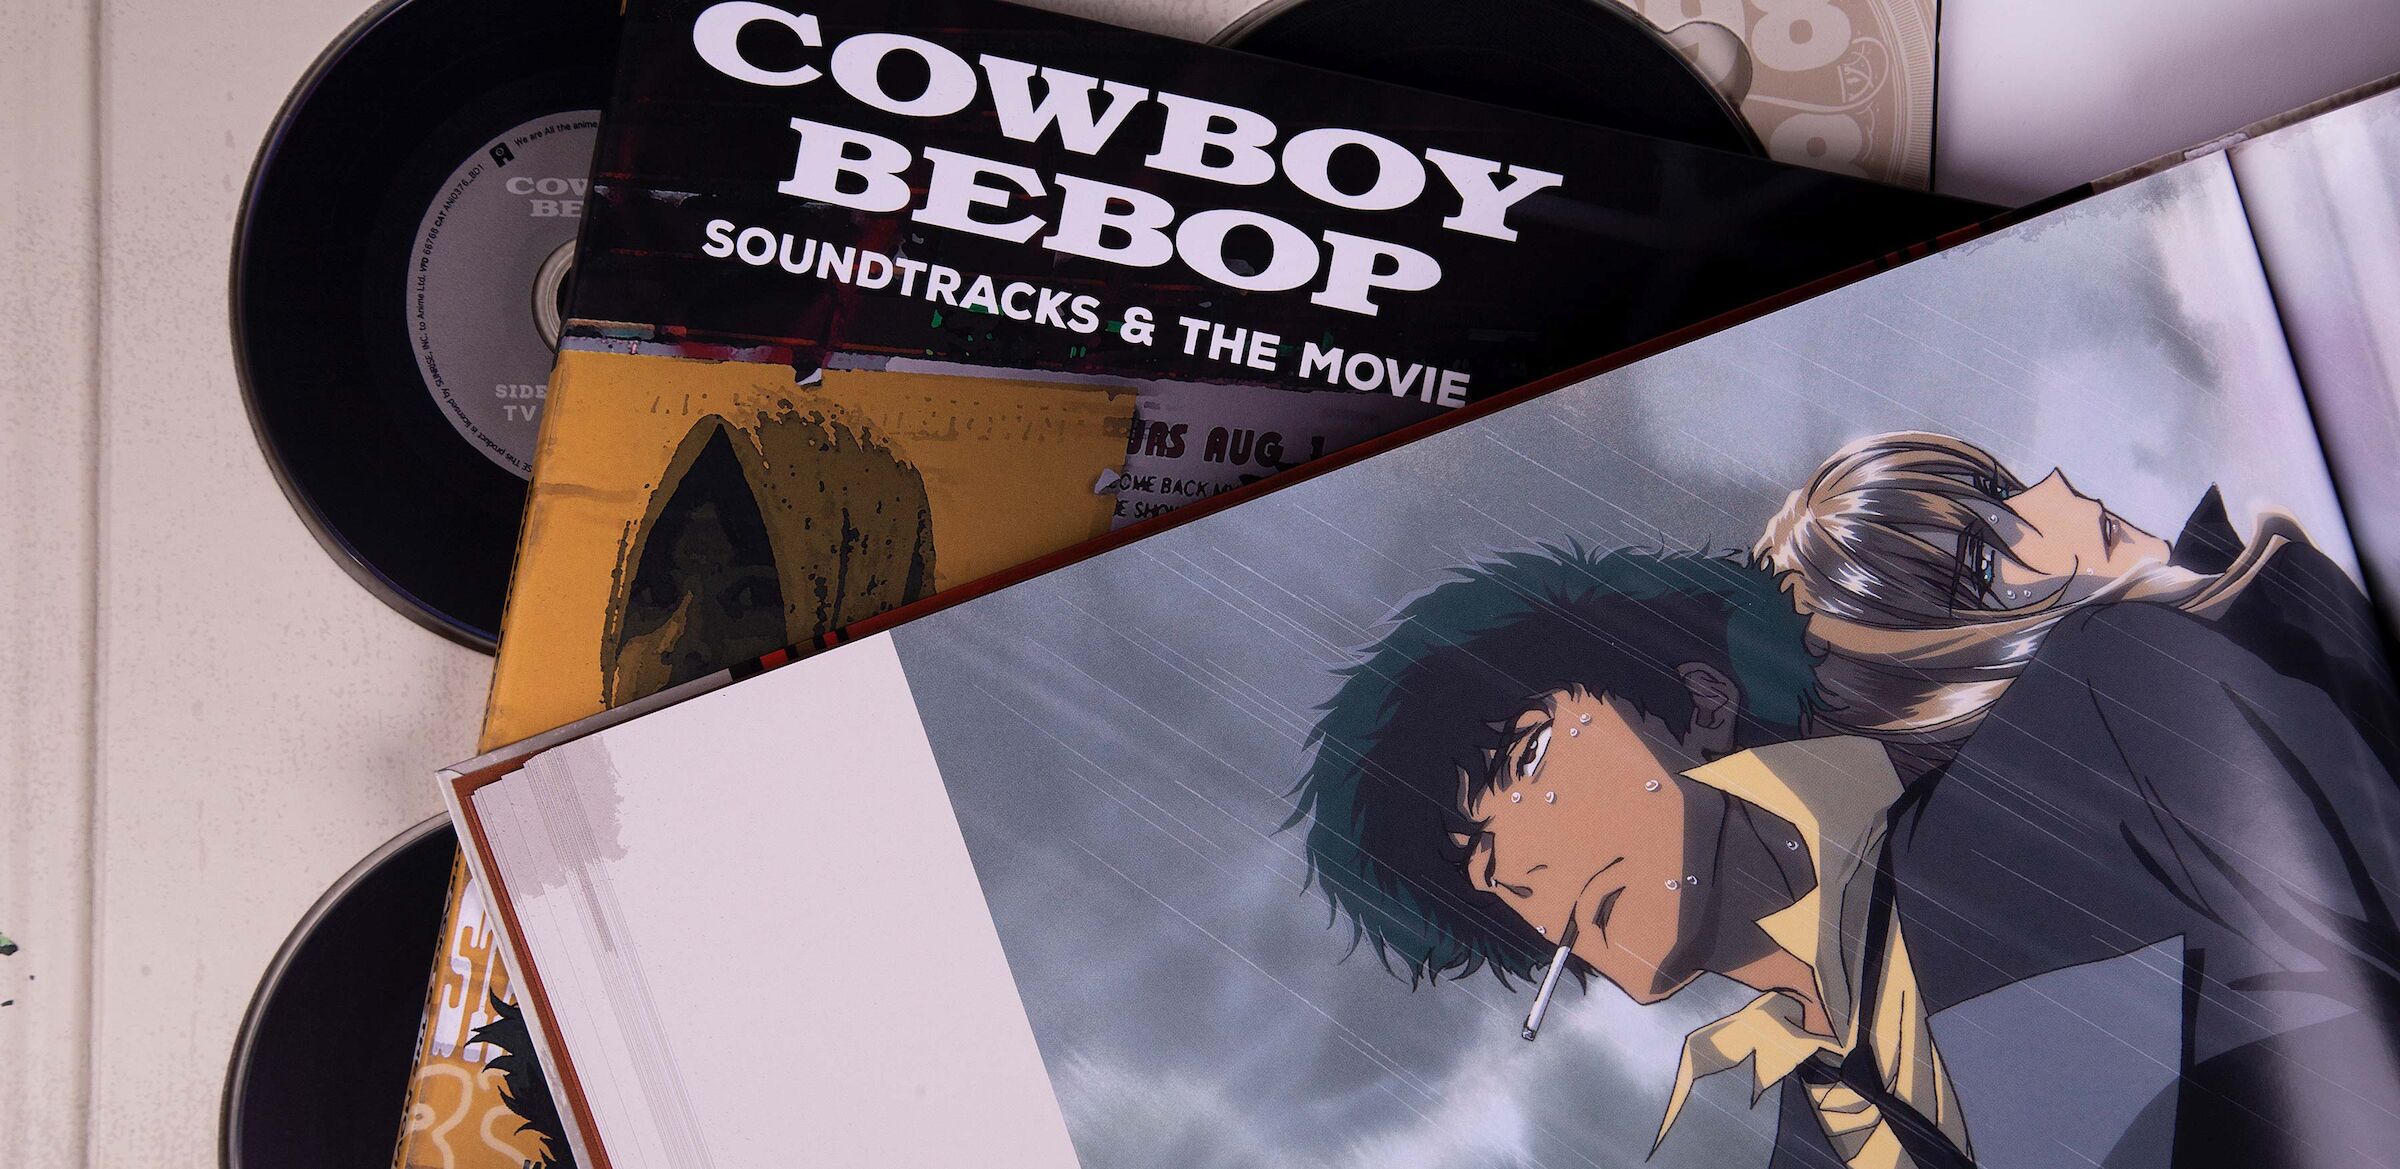 Cowboy Bebop 20th Anniversary Ultimate Edition with soundtracks on CD and illustrated book